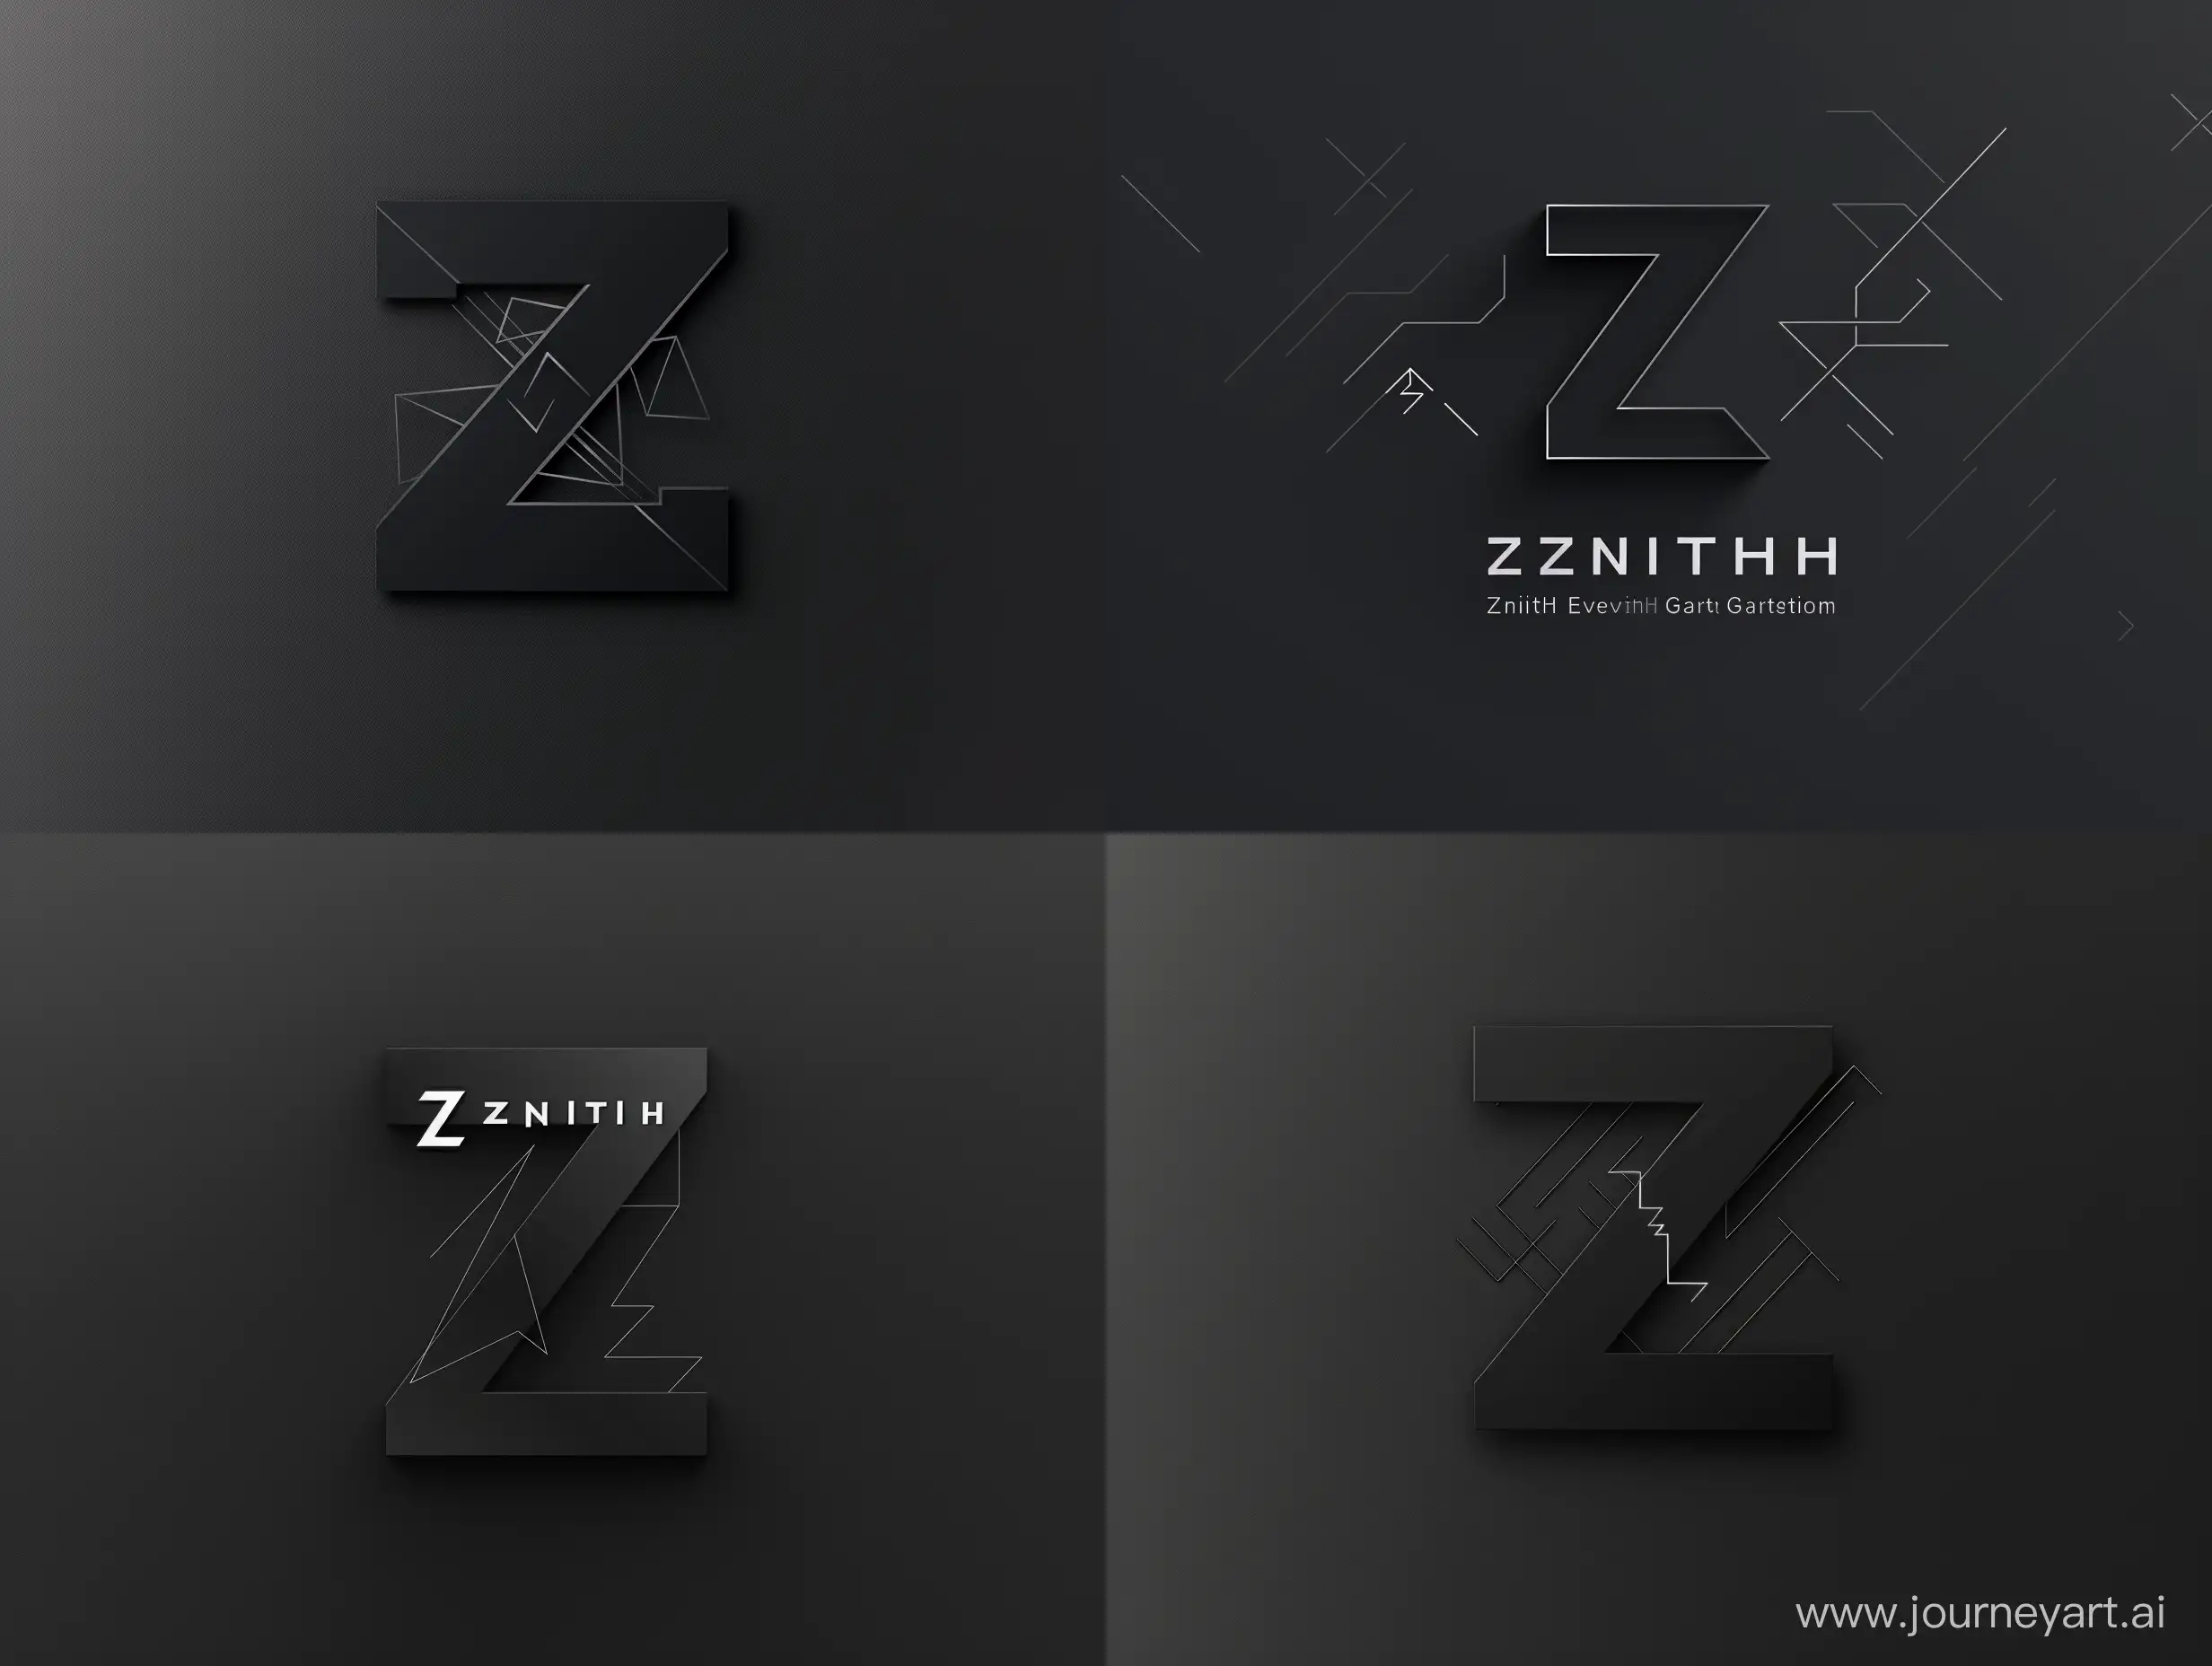 imagine Zenith Energy Gateway minimal Logo Design :Design a minimalist logo that embodies innovation and smart energy management. The logo must visually convey the device's leadership in sustainable home energy solutions. Key features include:Symbol: A minimal dynamic, stylized "Z" that integrates an upward arrow or peak, symbolizing reaching the zenith. This element should be simple yet bold, easily recognizable at any size.Energy Icon:minimal  Incorporate a subtle abstract motif, such as a simplified lightning bolt or interconnected lines, to represent energy and connectivity. This should complement the "Z" without overwhelming it.Color Scheme: black or dark gray for modern sophistication. 
Typography: Select a minimal and modern, sans-serif font for any text, ensuring it's readable in small and large scales. The font should reflect the logo's clean and futuristic aesthetic.Simplicity: Adhere to a "less is more" philosophy, focusing on clean lines and geometric shapes for a timeless design that fits seamlessly with smart home decor.The logo's design should be versatile for use in various applications, from device engraving to digital media, maintaining its integrity across different scales and formats. It aims to resonate with eco-conscious consumers, symbolizing the Zenith Energy Gateway as a beacon of eco-friendly innovation.logo design style